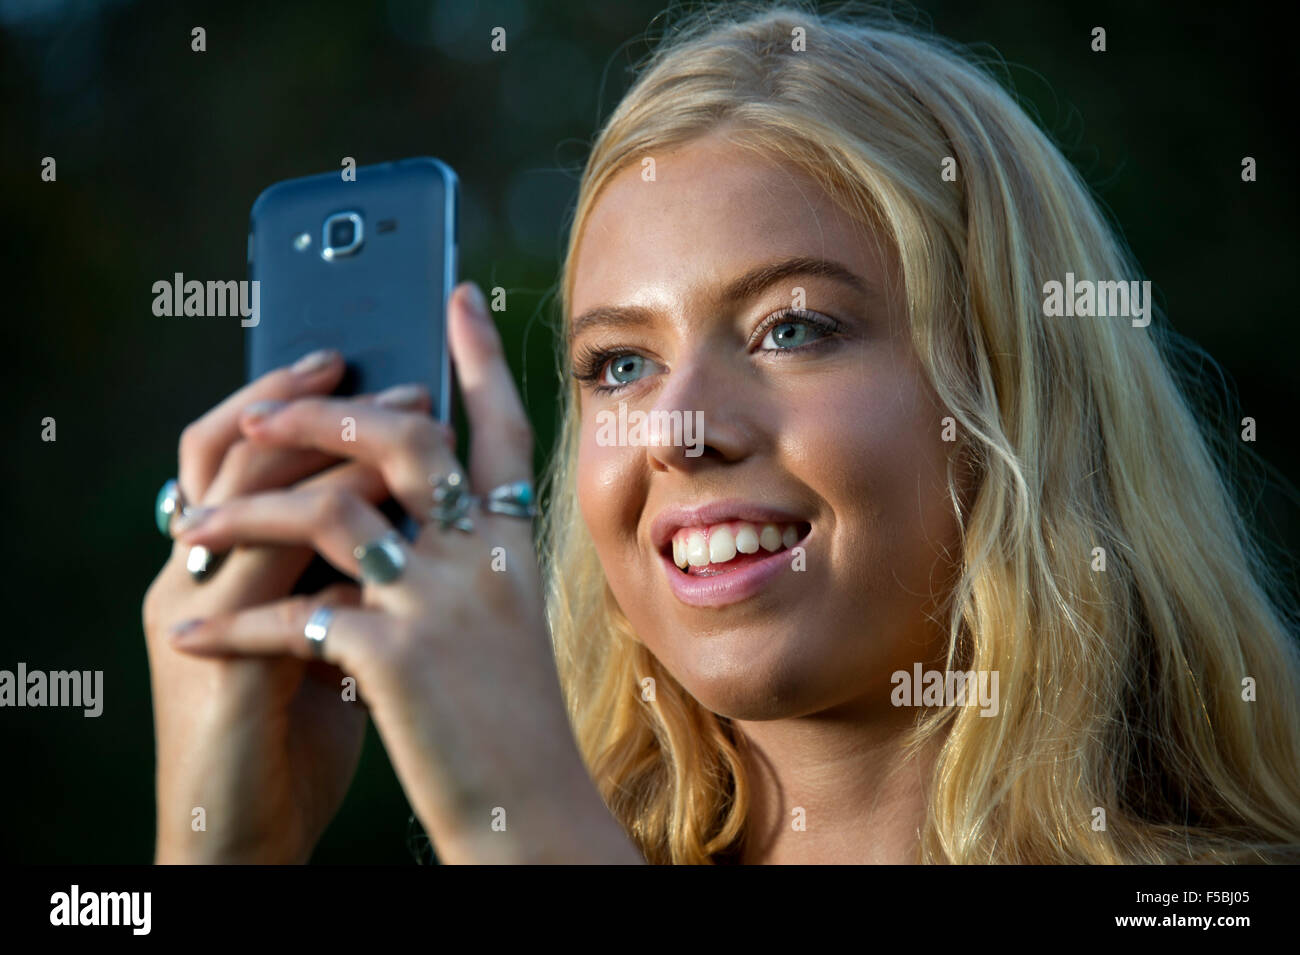 Young blonde woman using a mobile phone in the dark Stock Photo